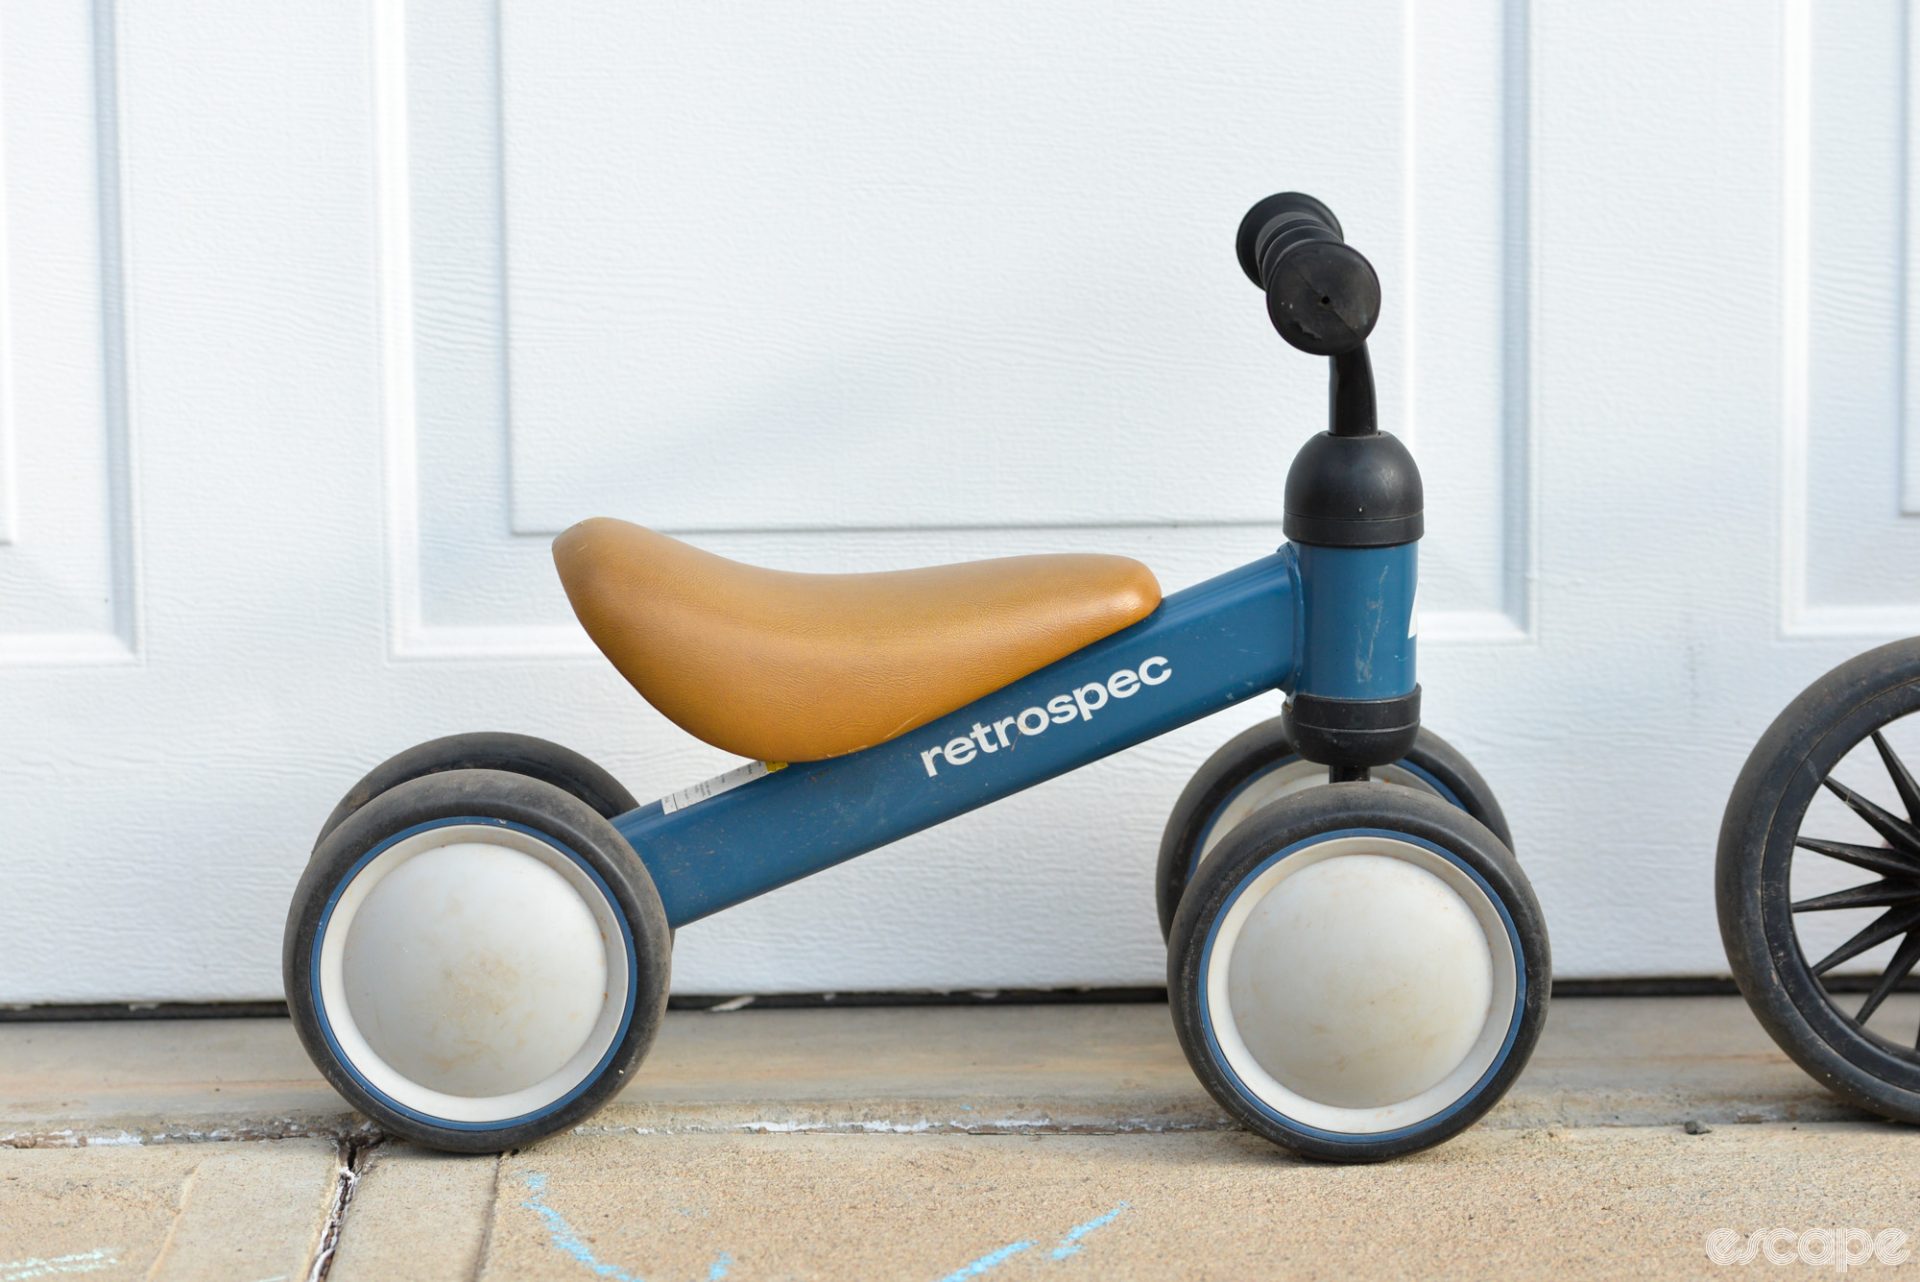 Retrospec's Cricket kids bike from the side. It has four tiny wheels, a large seat, and a 90-degree head angle.